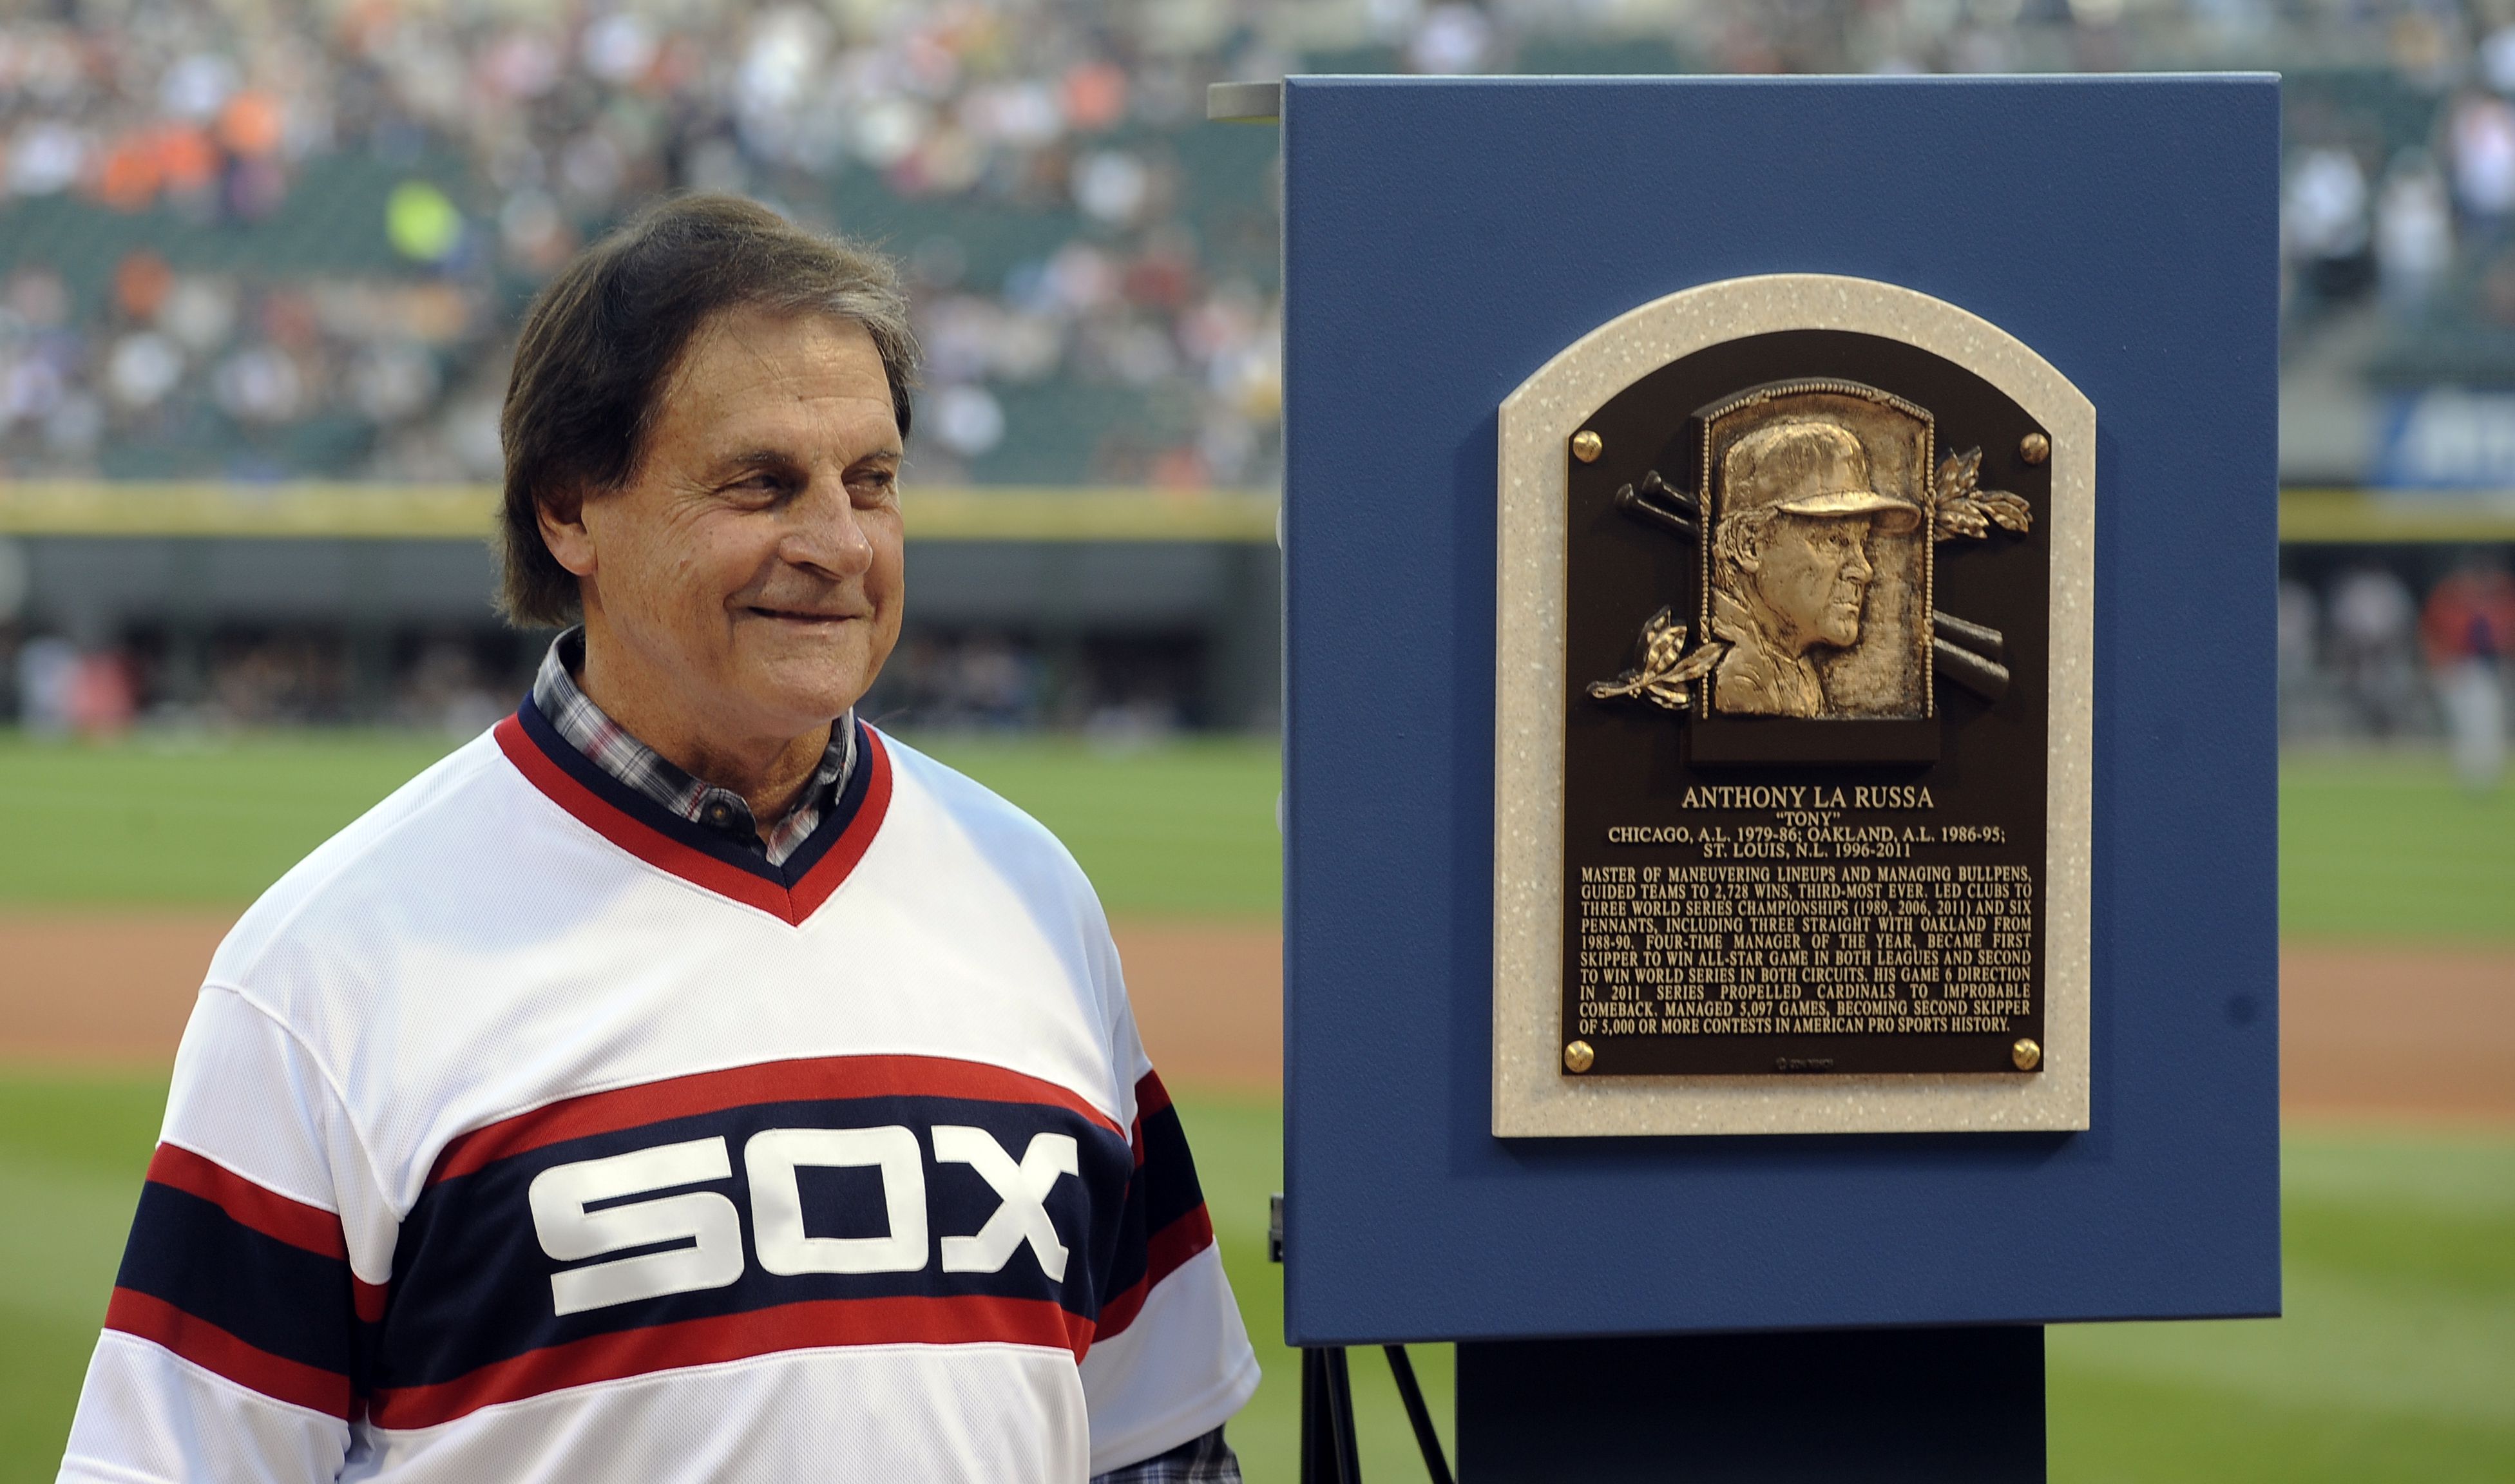 Tony La Russa tries his best to get fired, as the White Sox beat the Rays  despite a clear setup to get smoked - South Side Sox